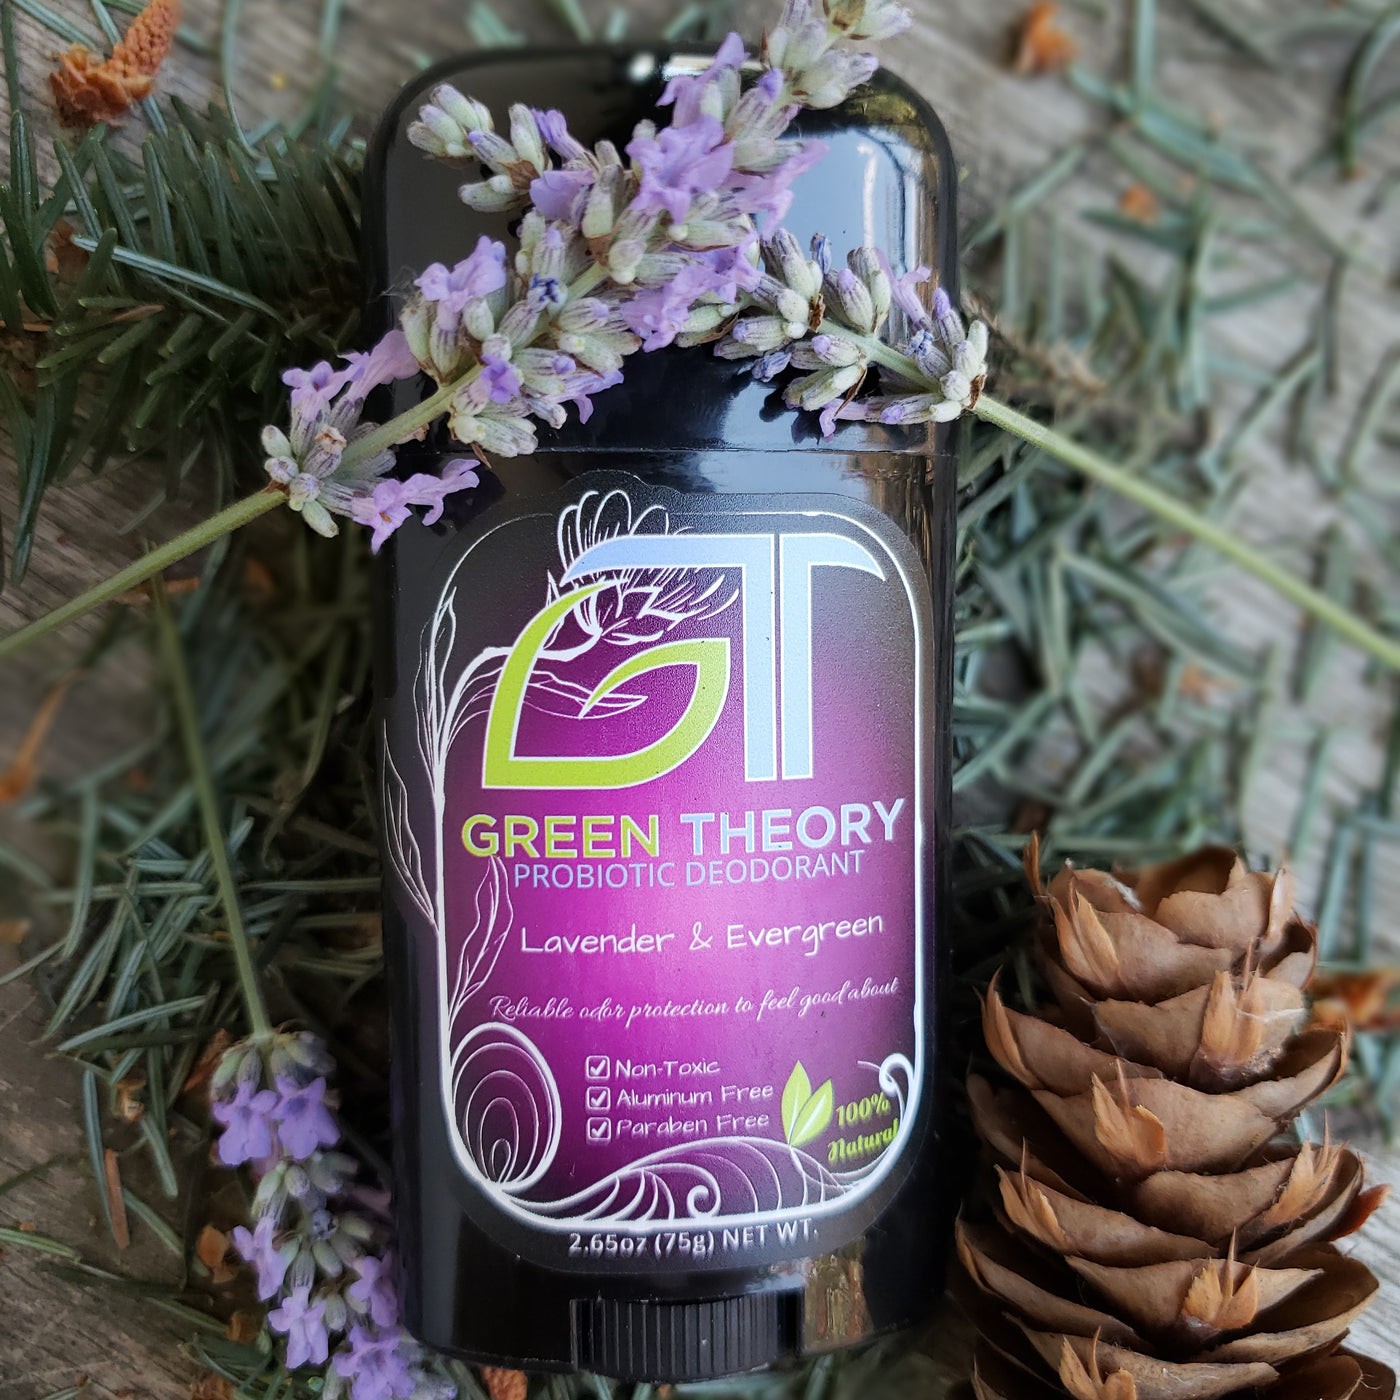 photo of green theory lavender $evergreen probiotic natural aluminum free deodorant for women laying with its front label up on top of a wood texture surrounded by pine needles, a pine cone and lavender sprigs